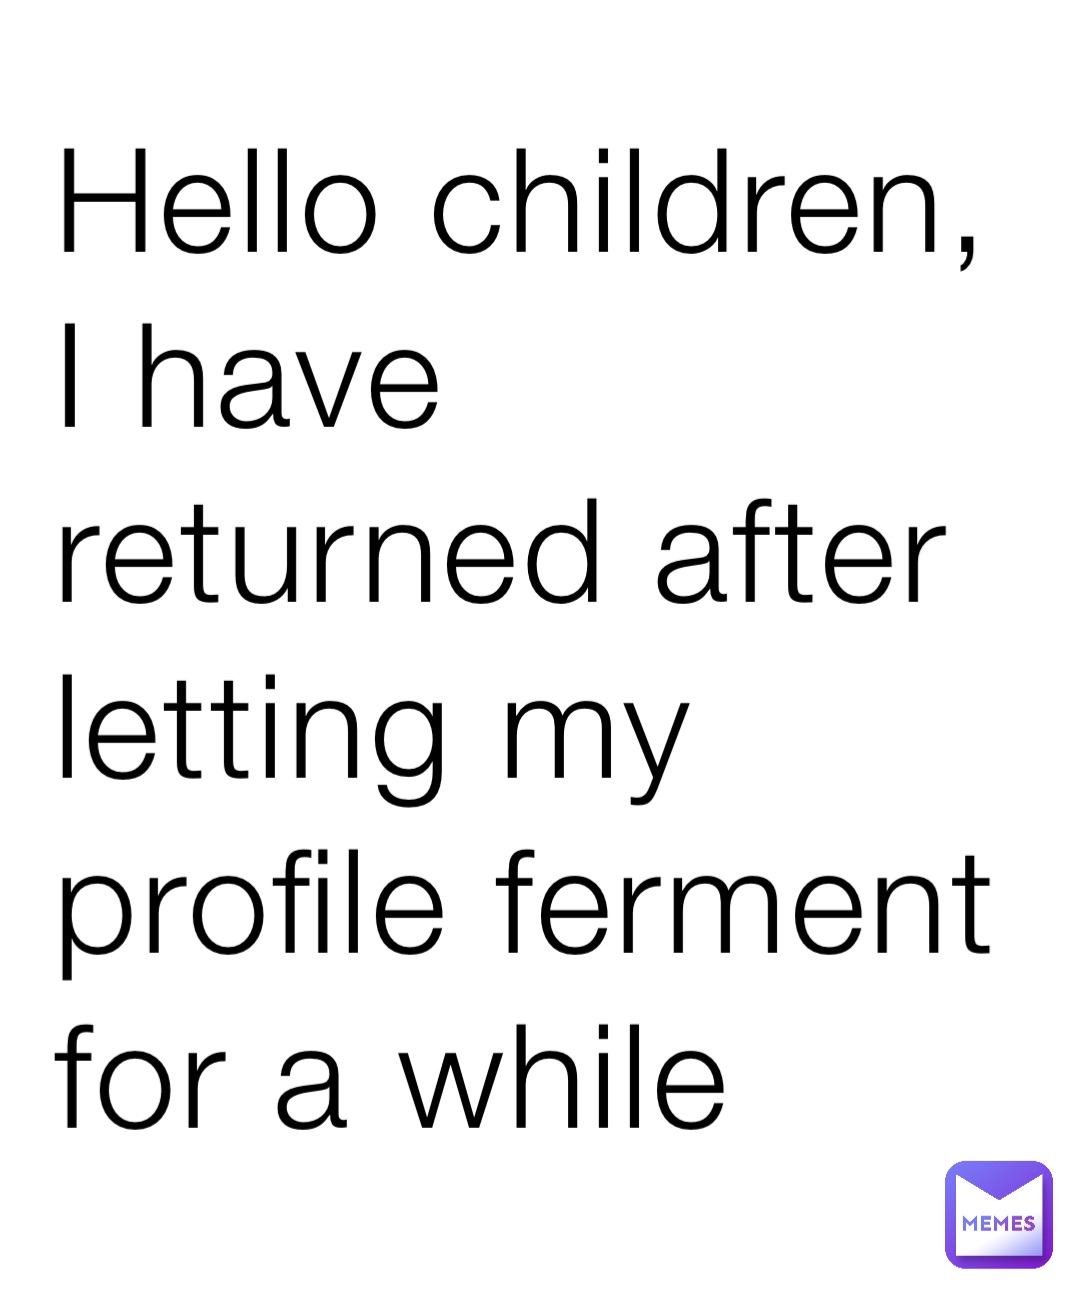 Hello children, I have returned after letting my profile ferment for a while